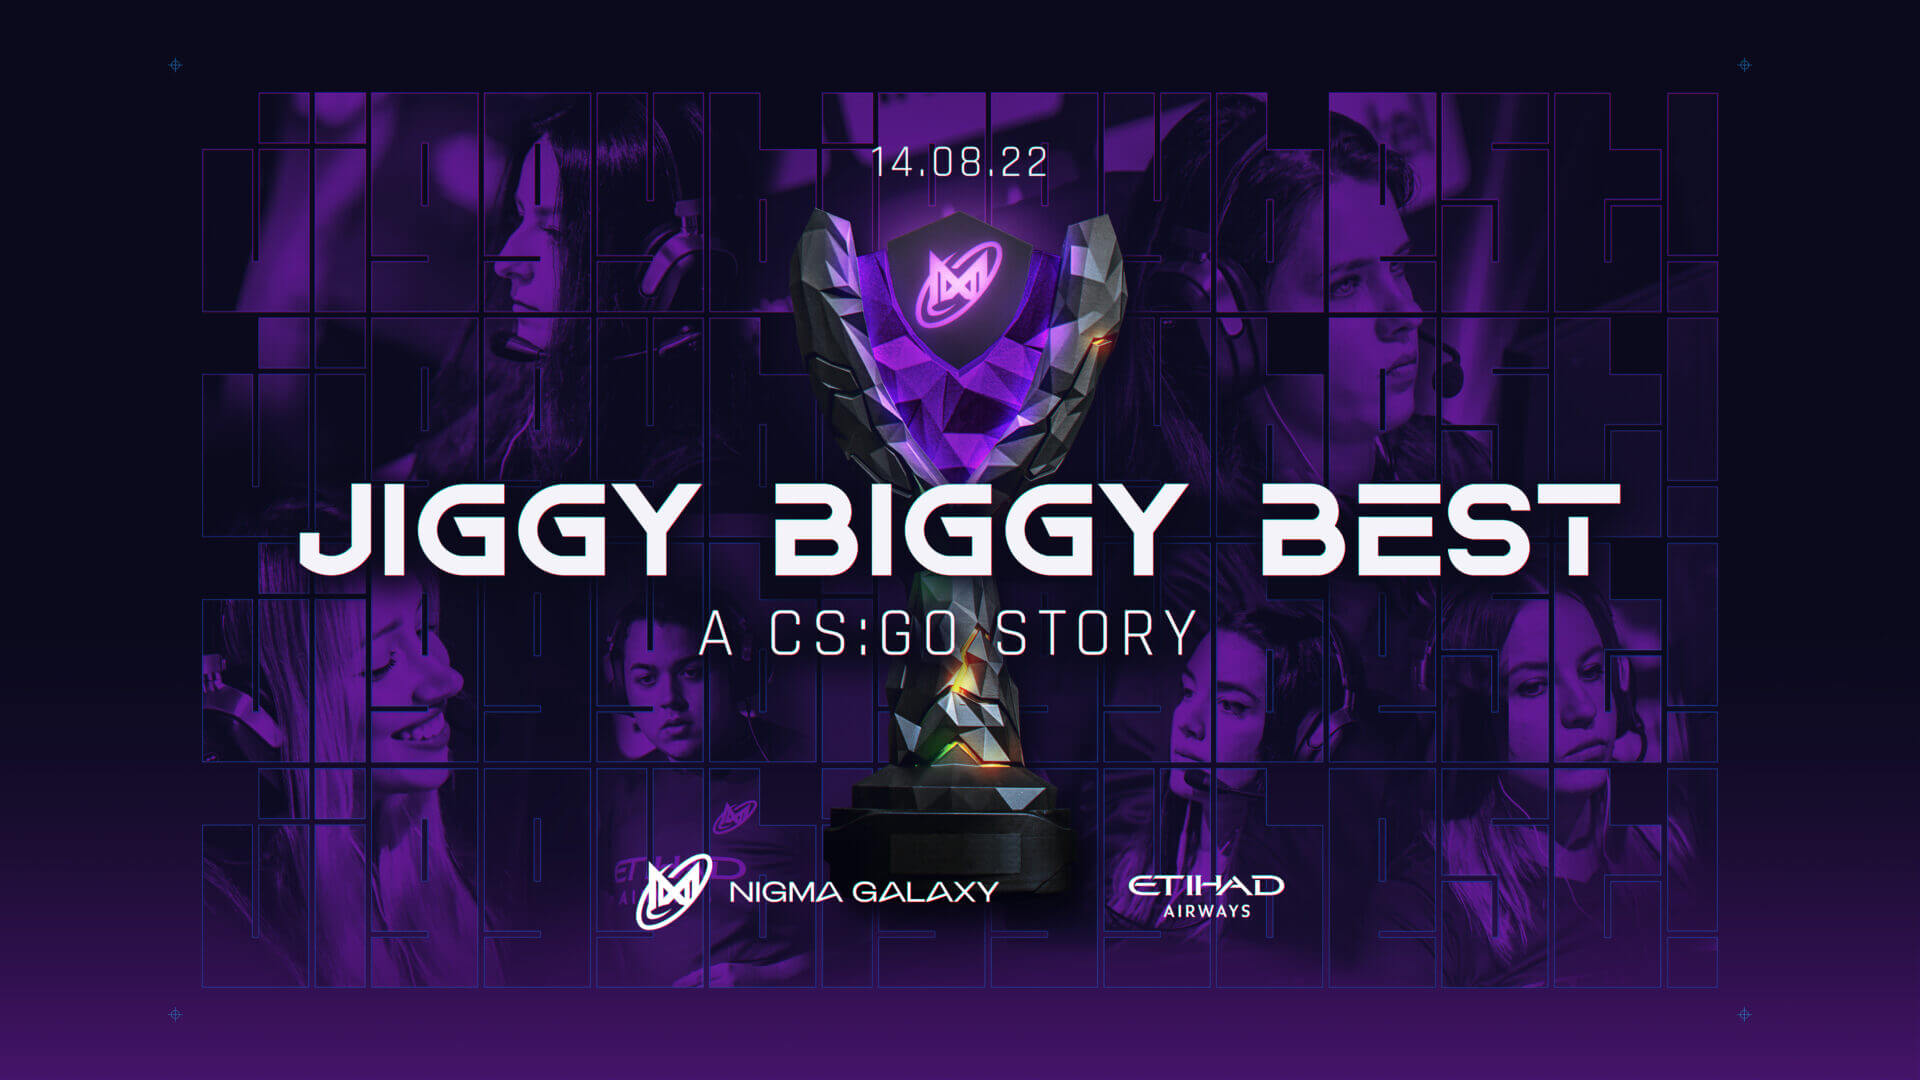 We are happy to announce the release of Jiggy Biggy Best A CS:GO Stroy our documentary series showcasing our team's journey to becoming the best in the world!